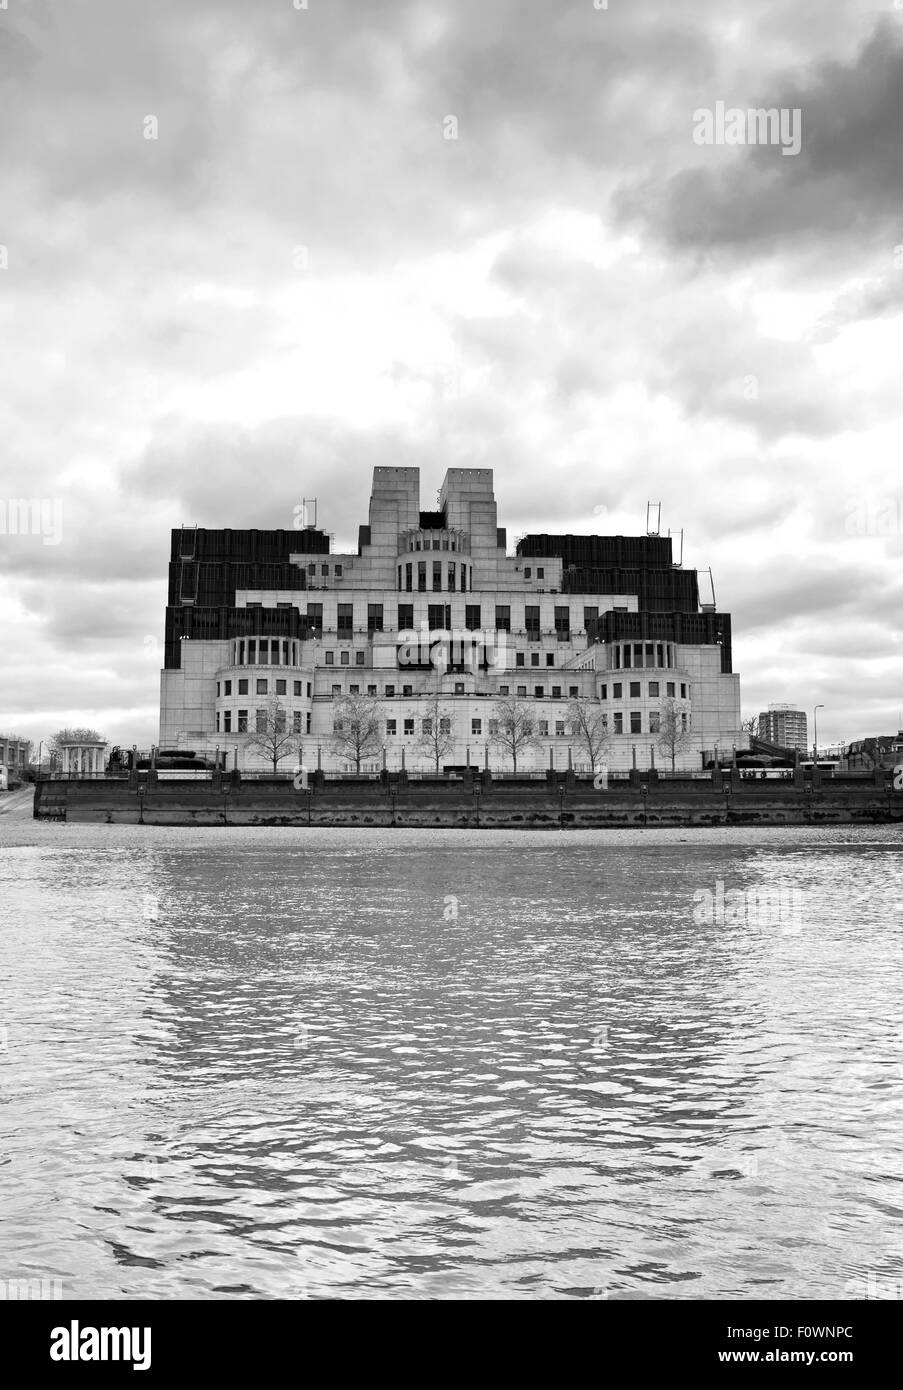 The British Secret Intelligence Service (MI6) headquarters building at Vauxhall, seen from the River Thames, London England UK Stock Photo